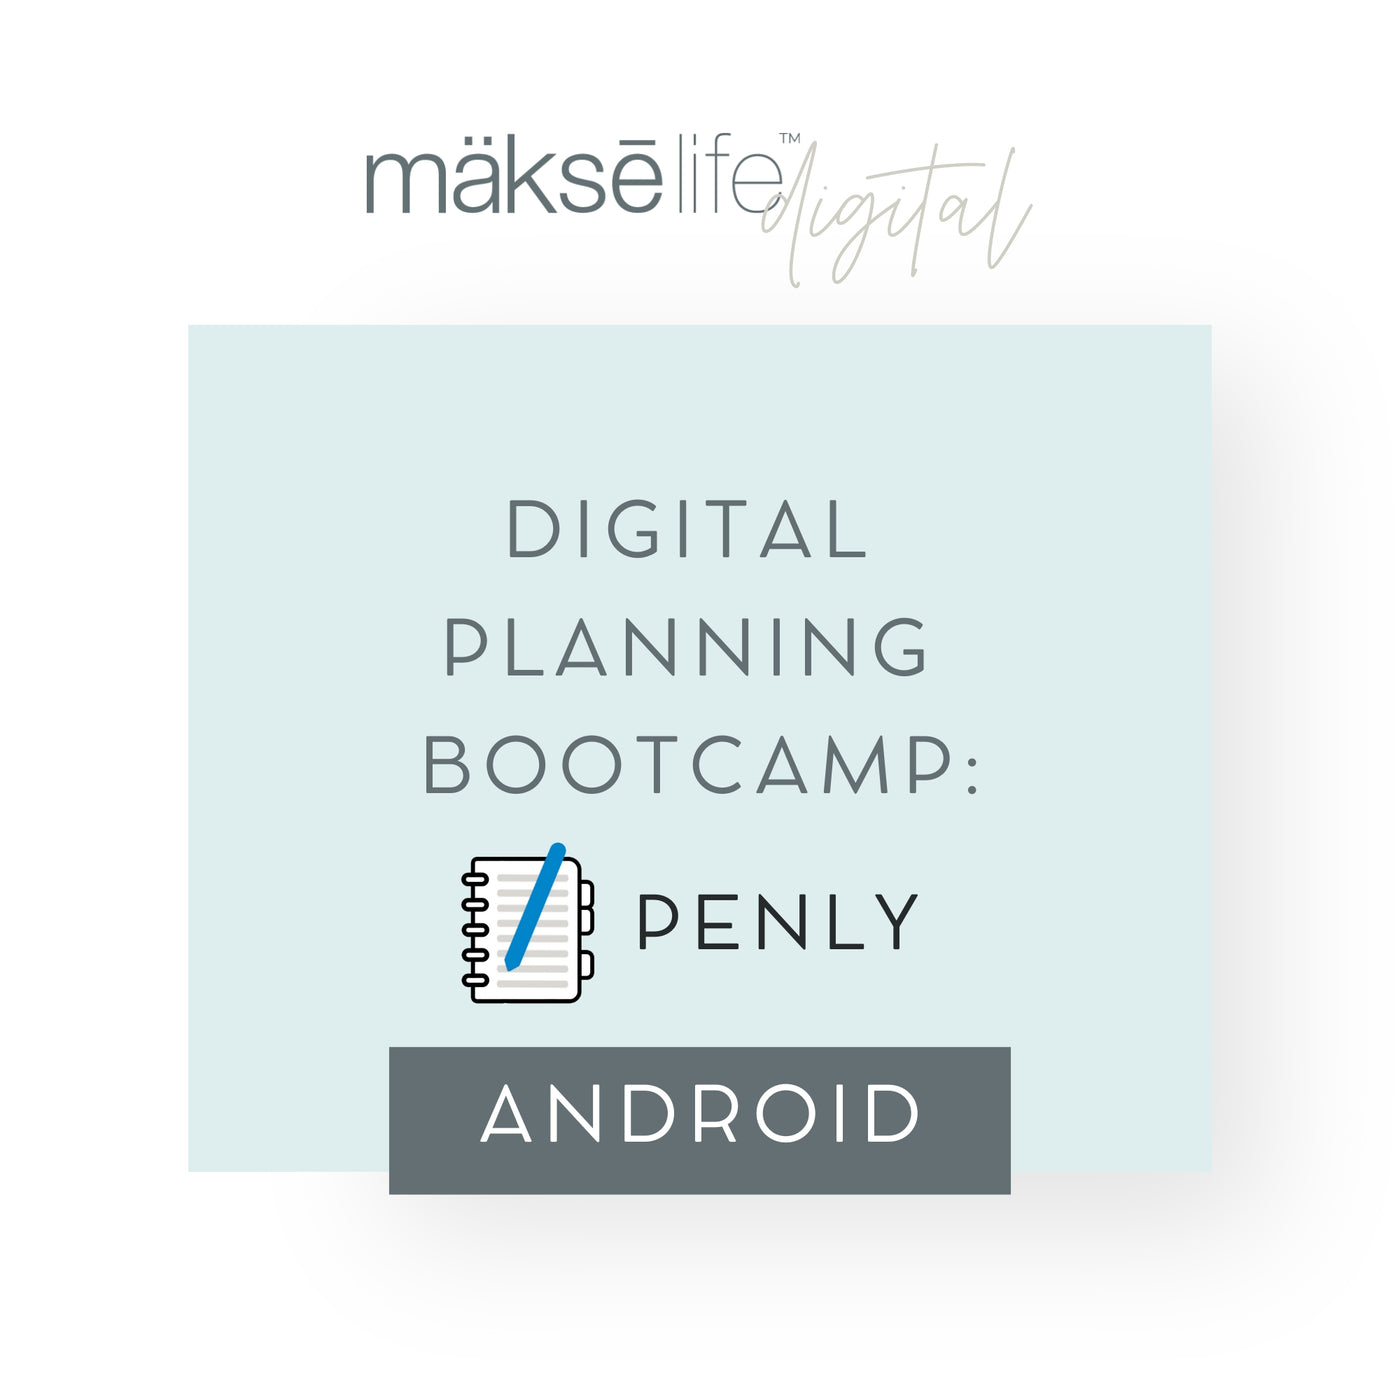 Digital Planning Bootcamp - Android/Penly Version